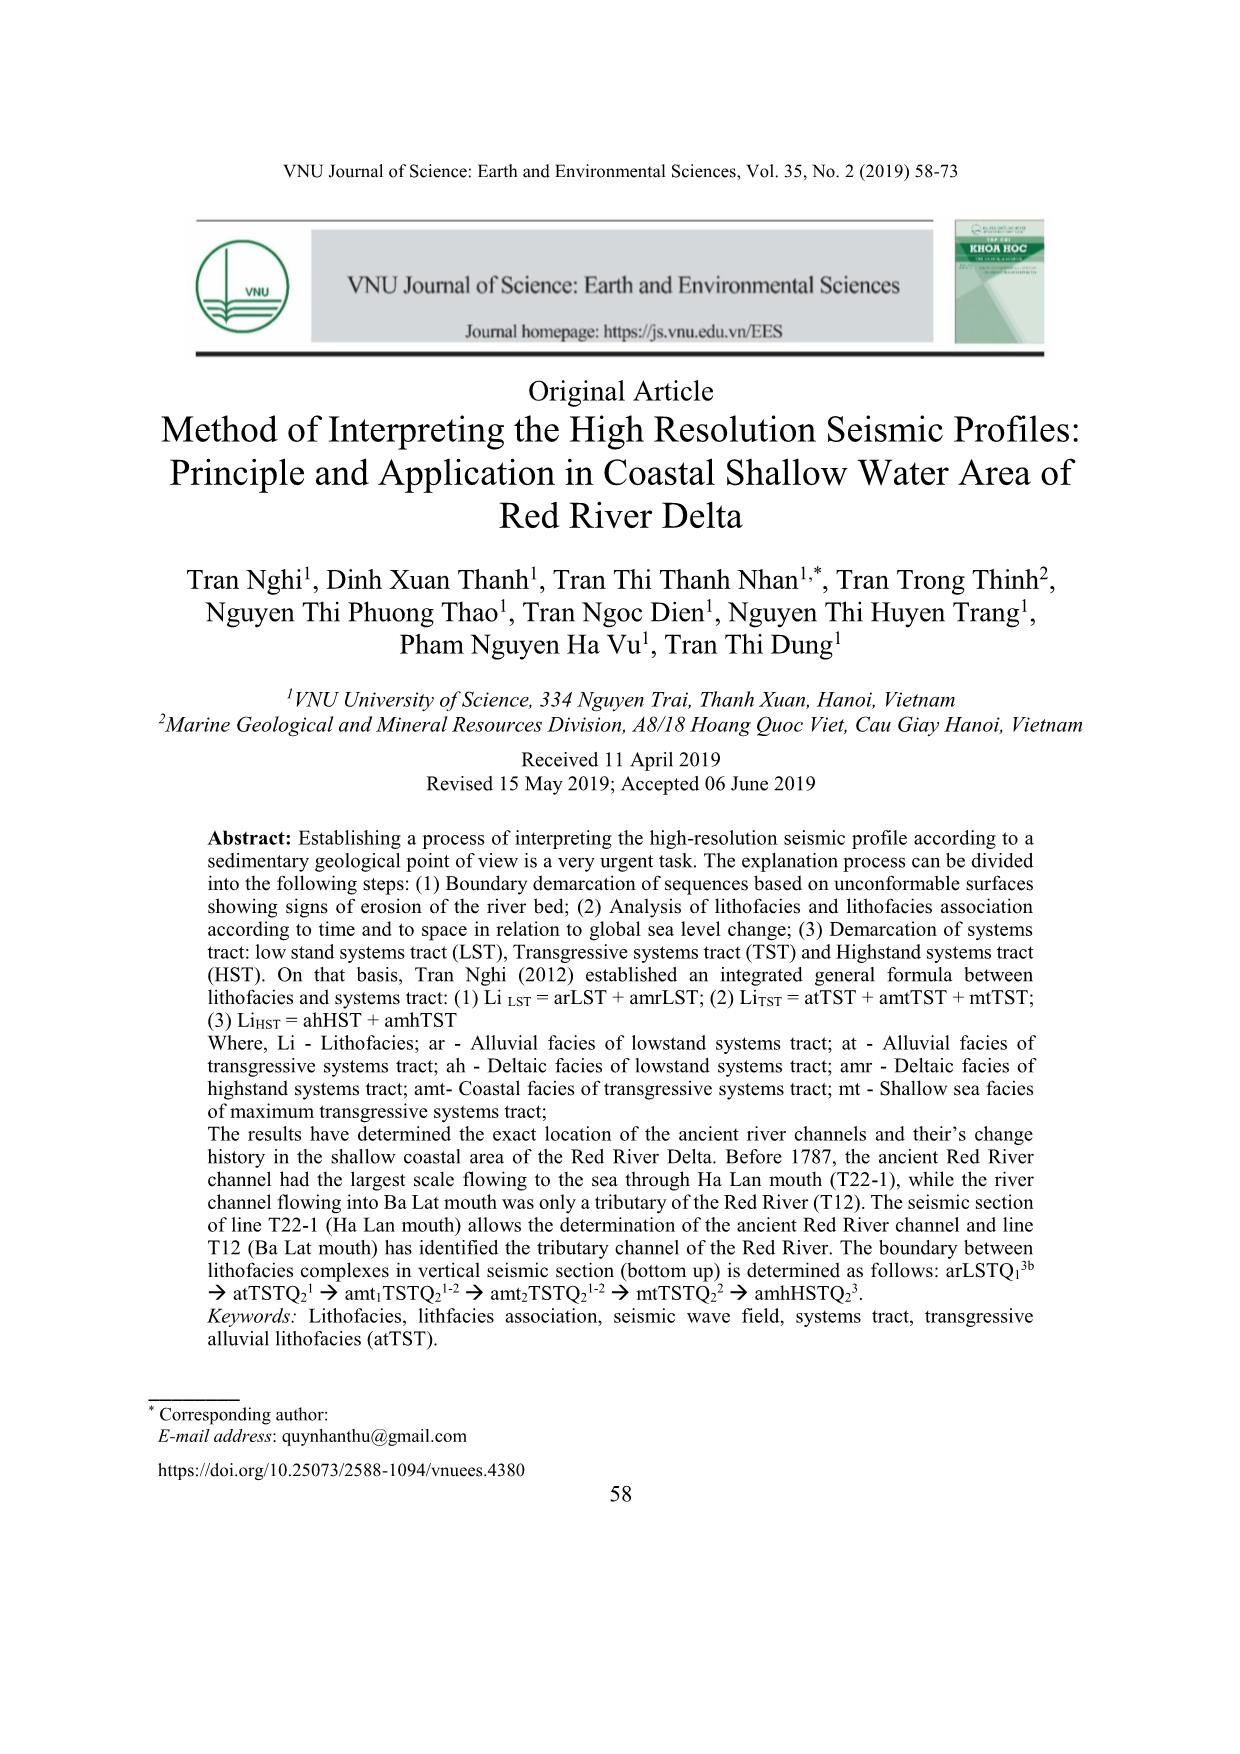 Method of Interpreting the High Resolution Seismic Profiles: Principle and Application in Coastal Shallow Water Area of Red River Delta trang 1